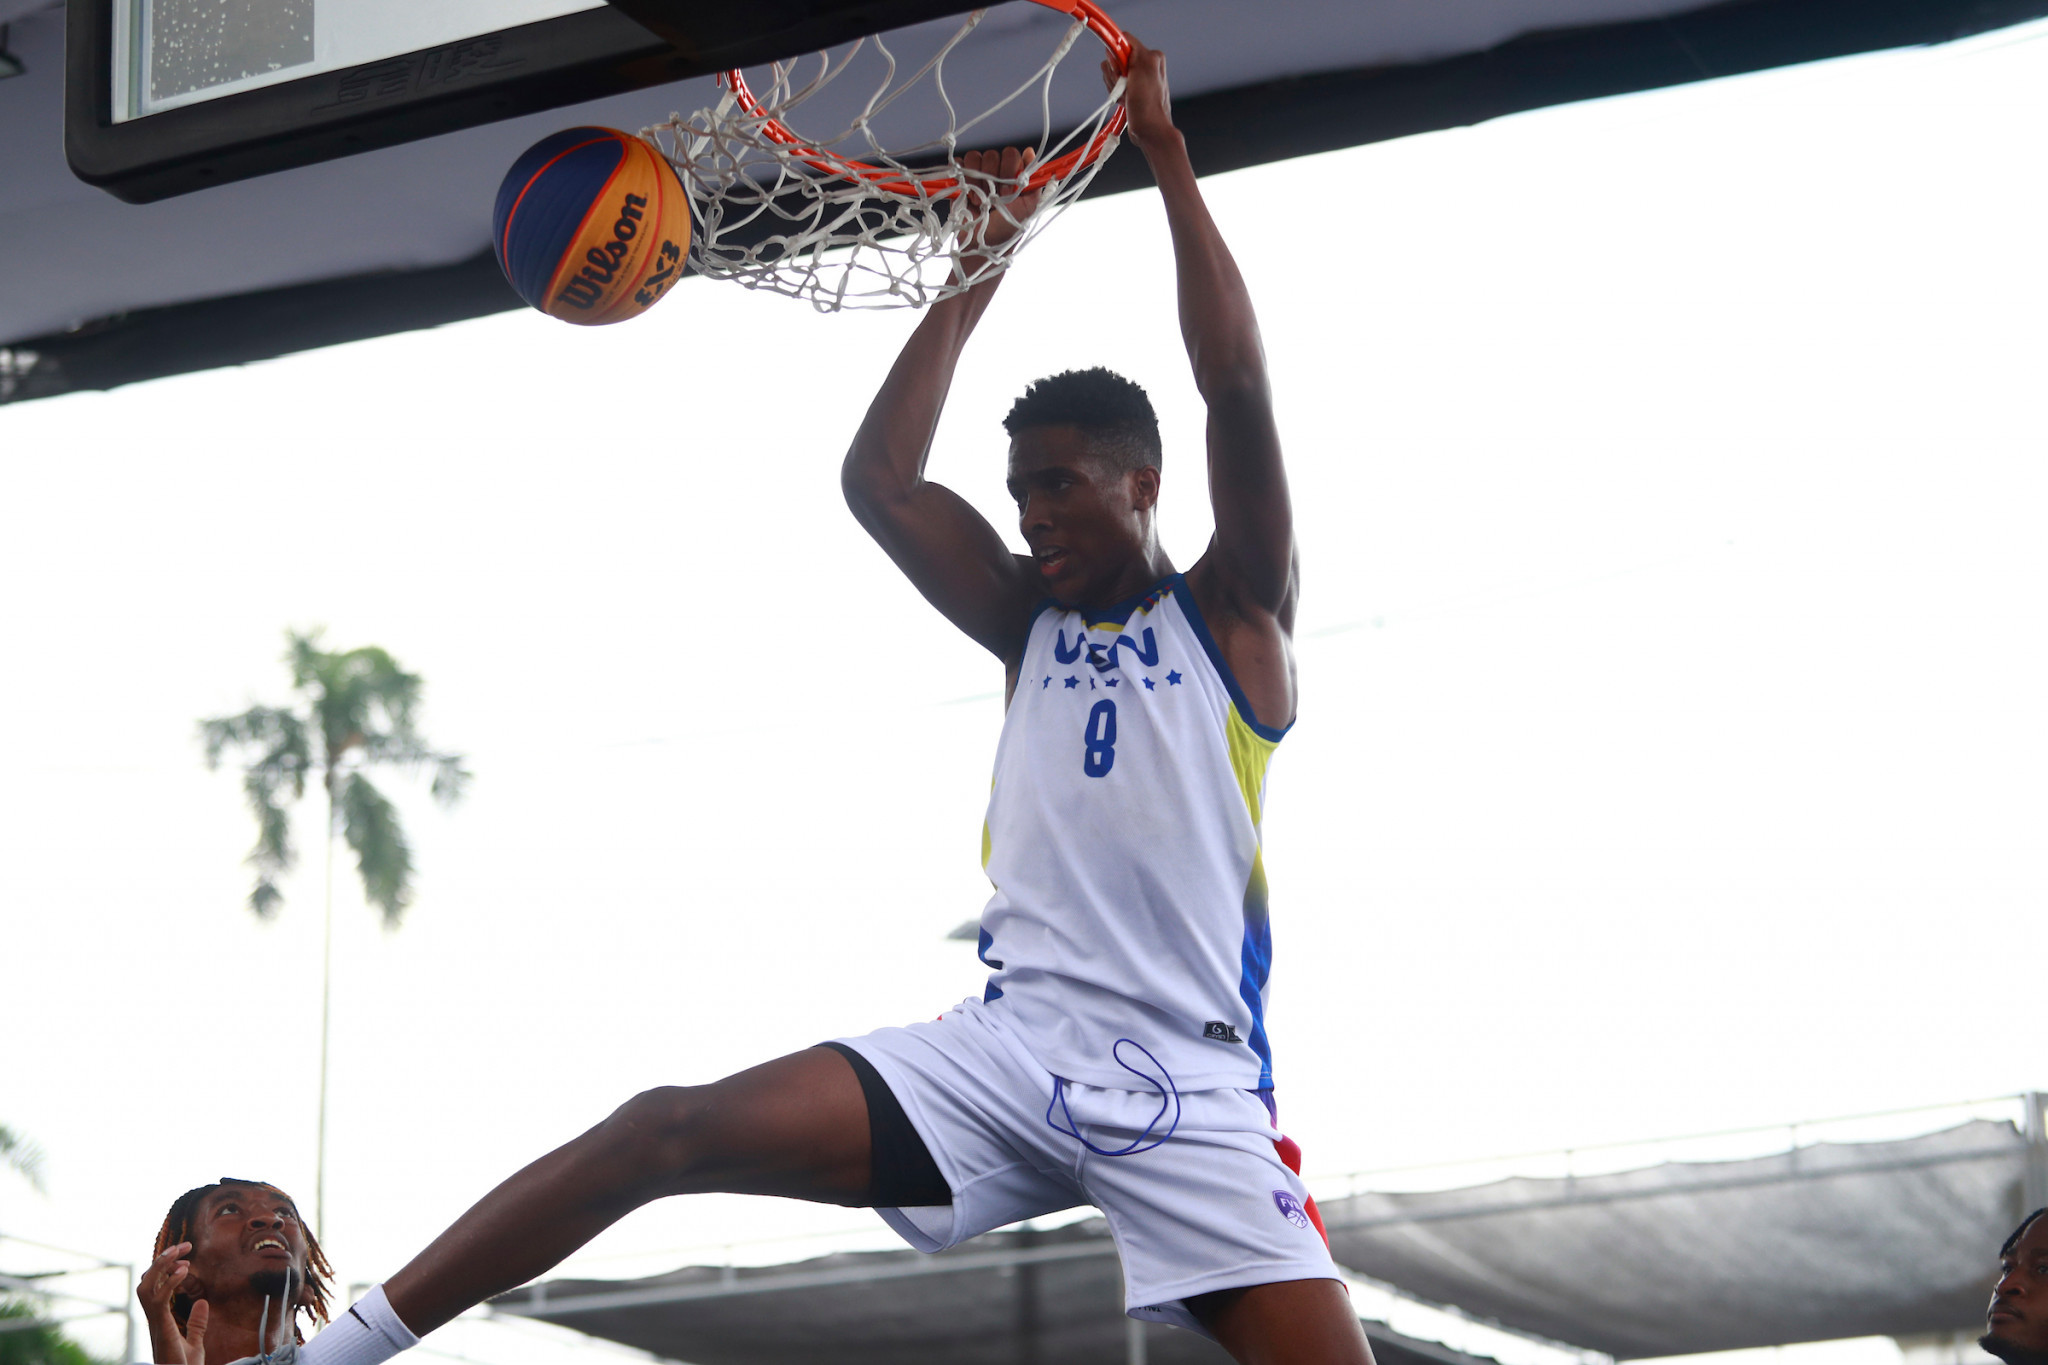 Venezuela cruised past the British Virgin Islands 22-11 to remain undefeated in Group A of the men's 3x3 basketball tournament ©Agencia.Xpress Media